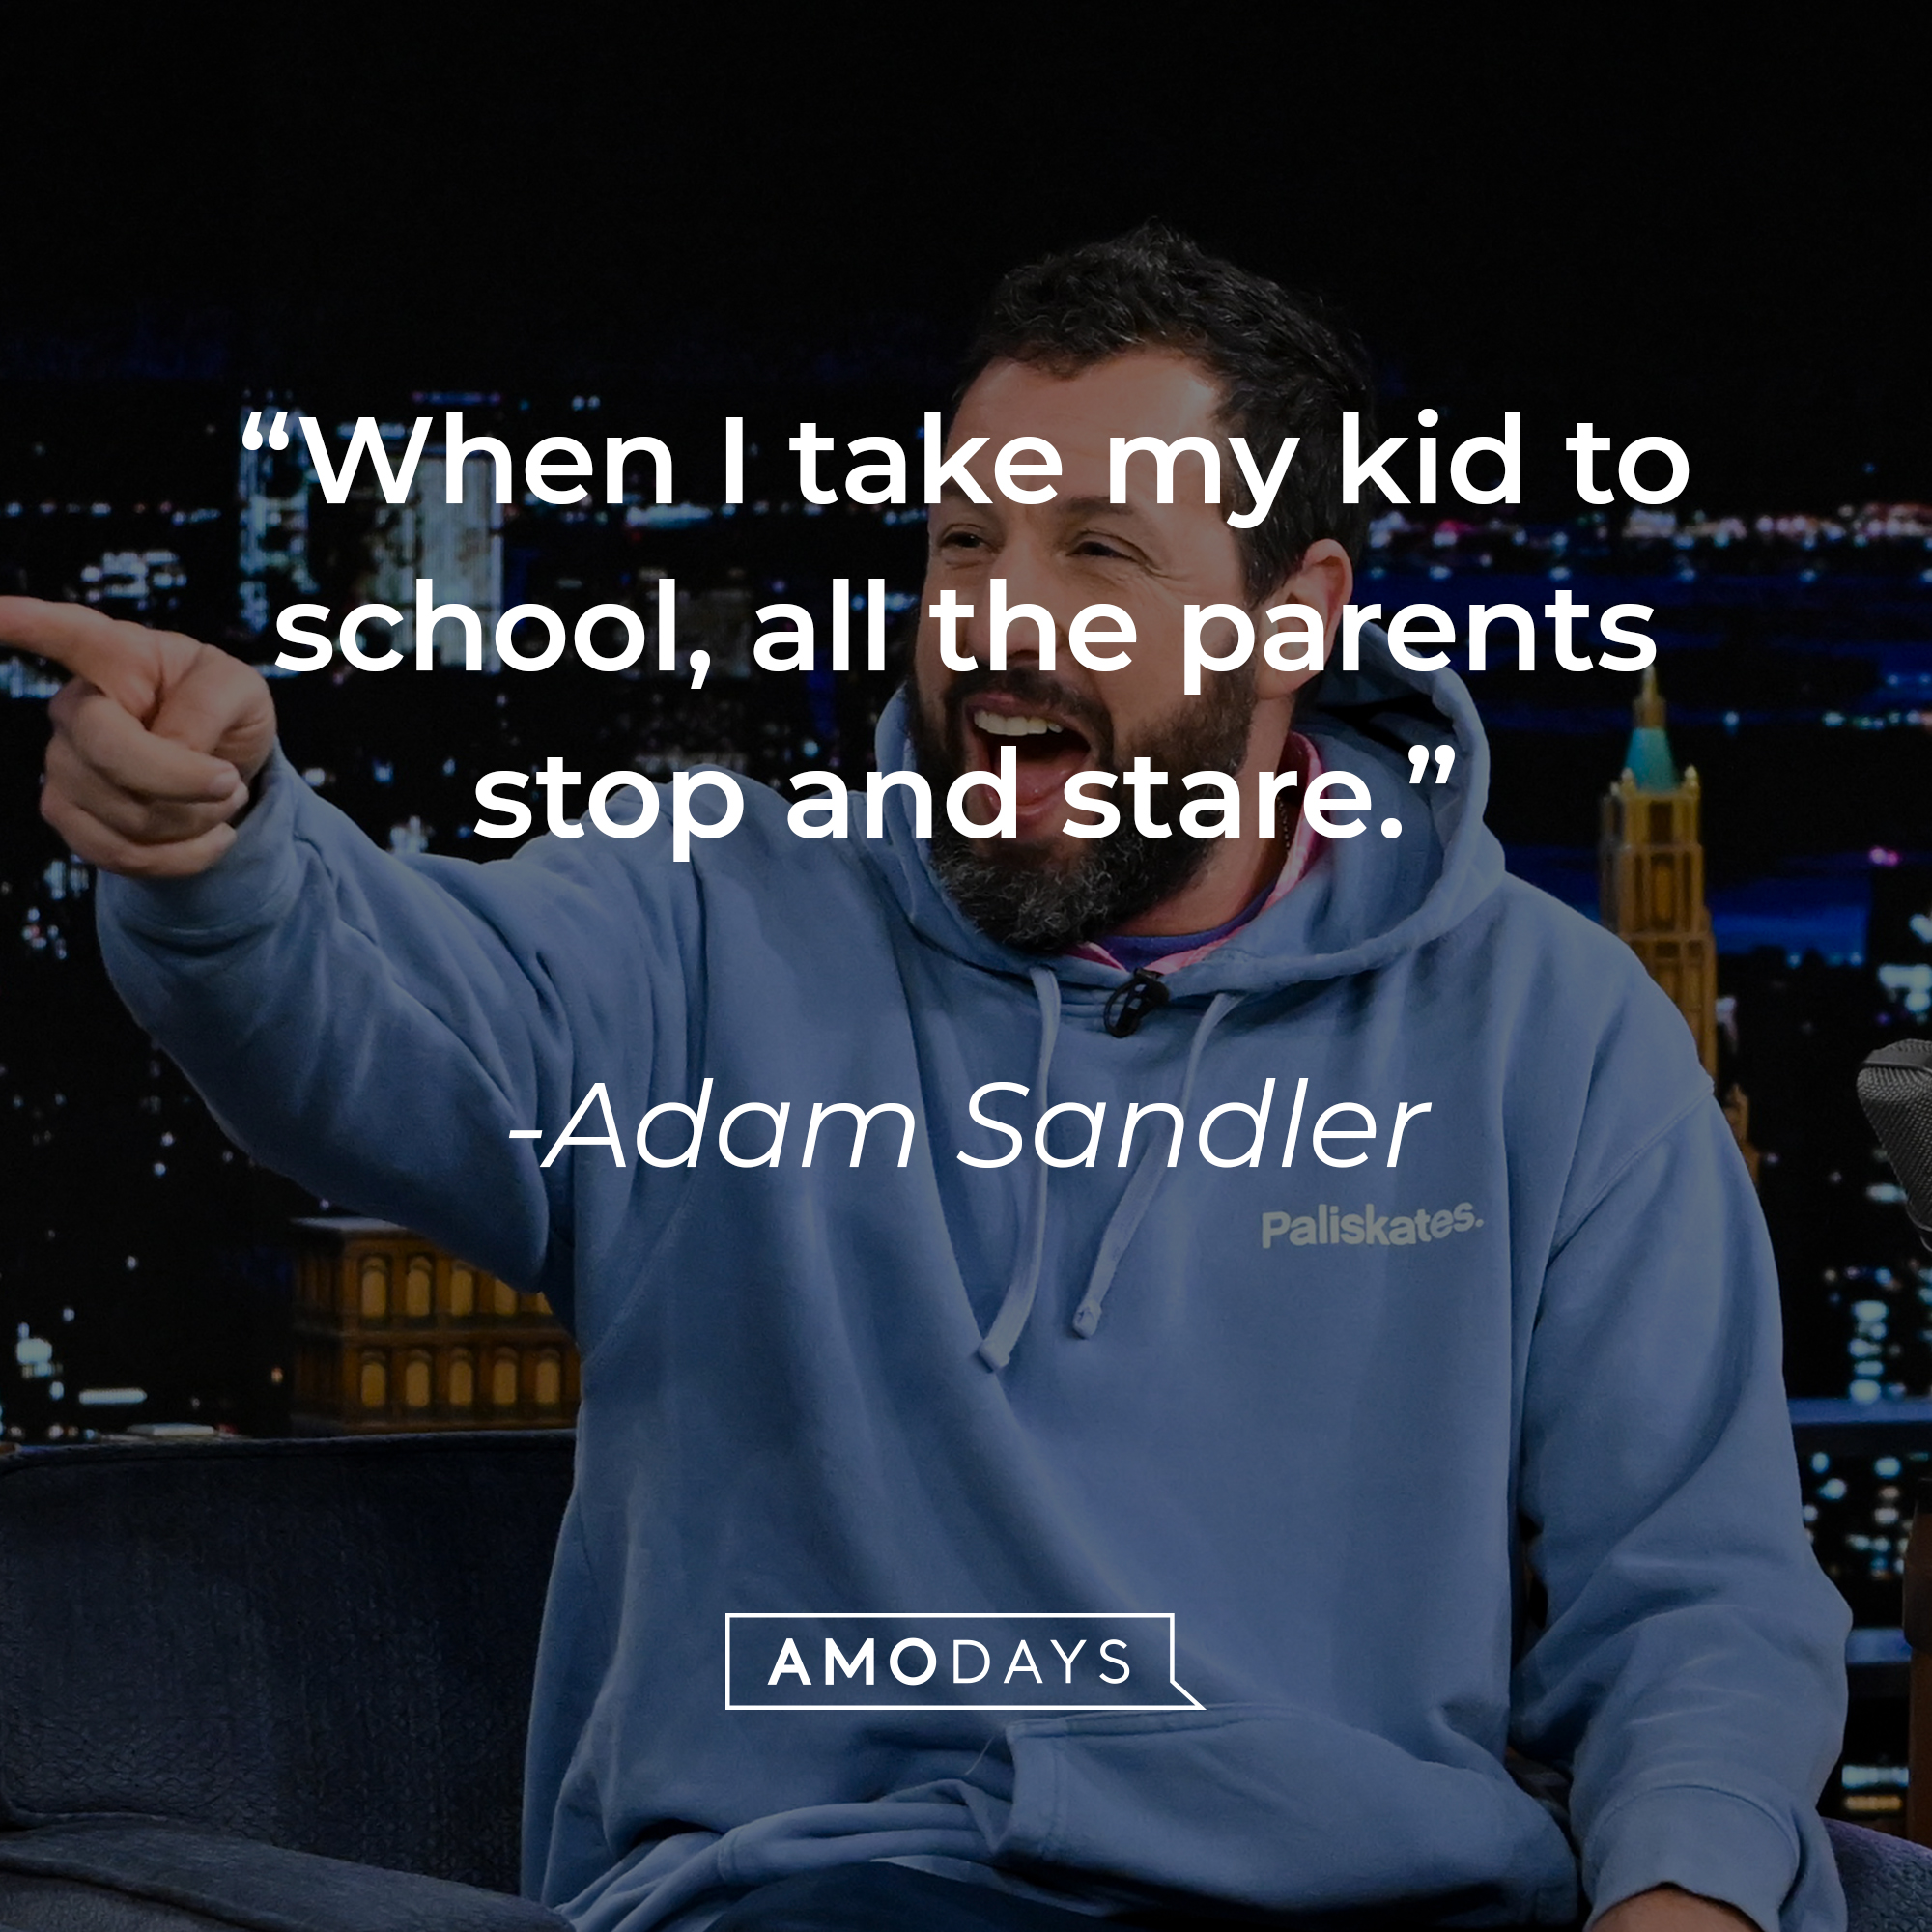 Adam Sandler's quote: “When I take my kid to school, all the parents stop and stare.” | Source: Getty Images